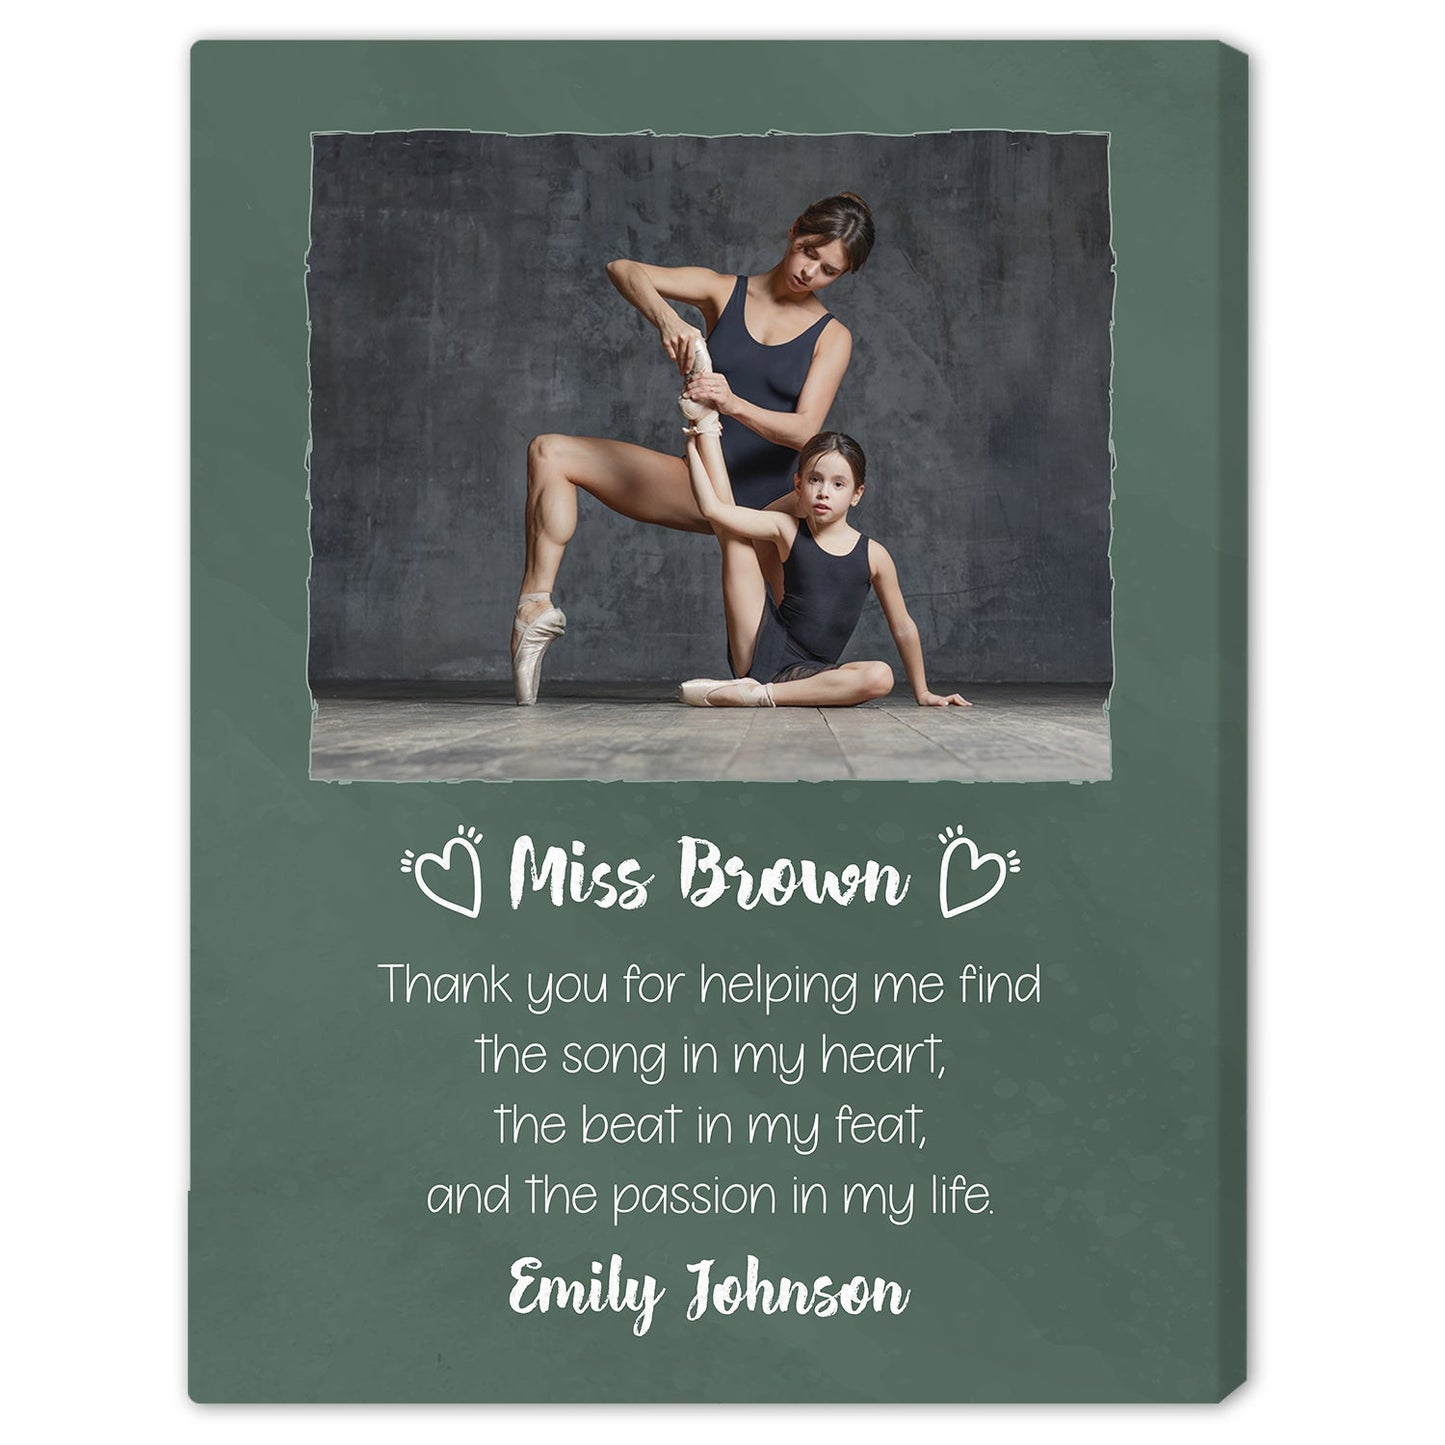 A Passion For Life - Personalized Teacher's Day, Birthday or Christmas gift For Dance Teacher - Custom Canvas Print - MyMindfulGifts